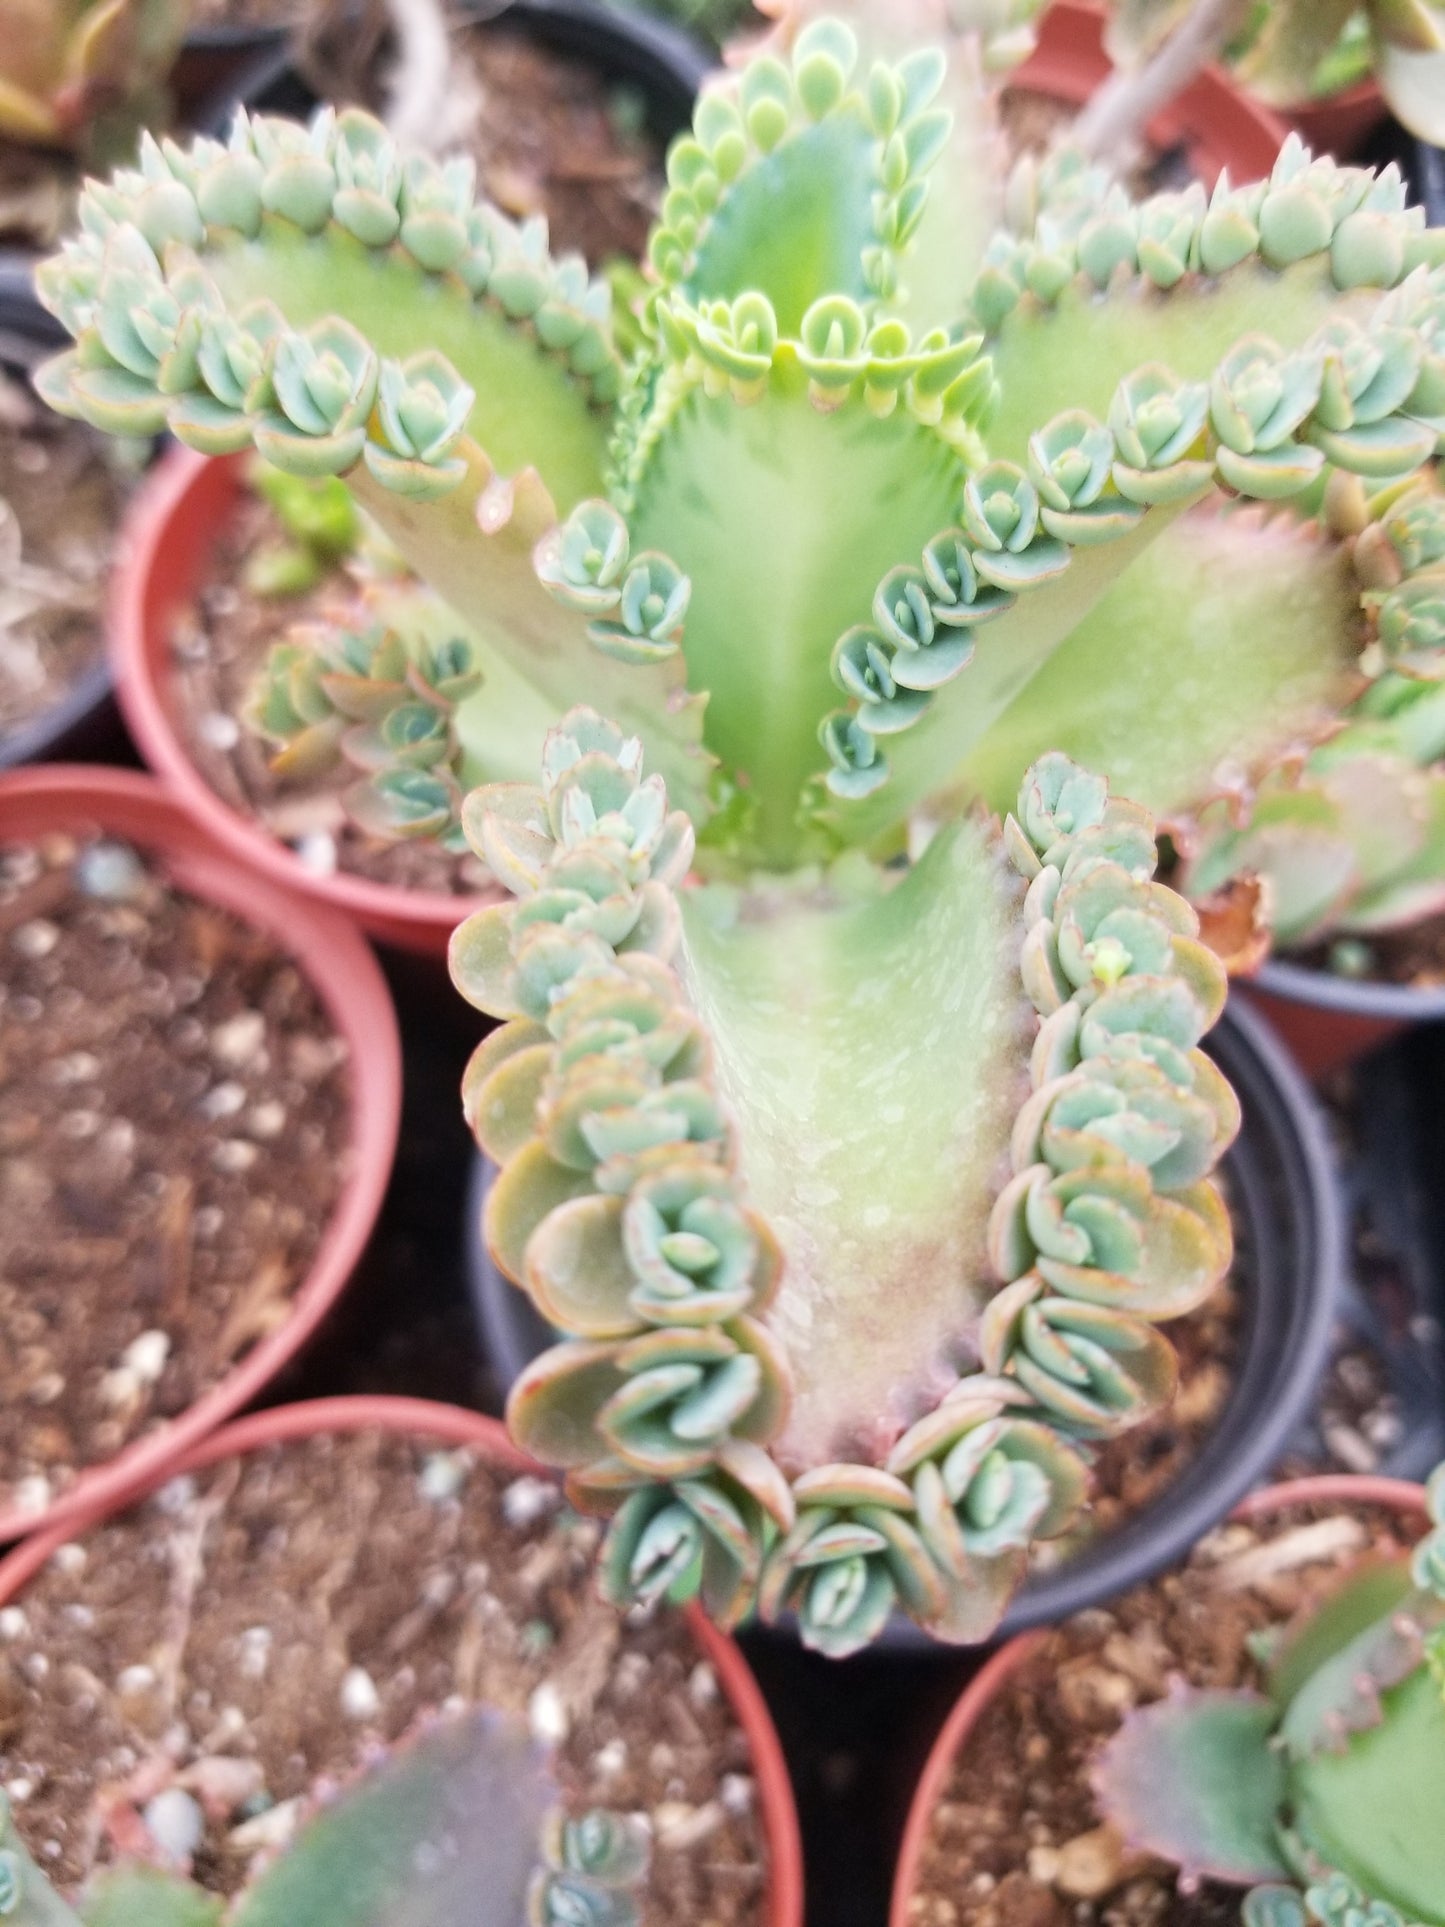 Kalanchoe Deigremontiana "Mexican Sombrero" (4" Pot) "babies are included"